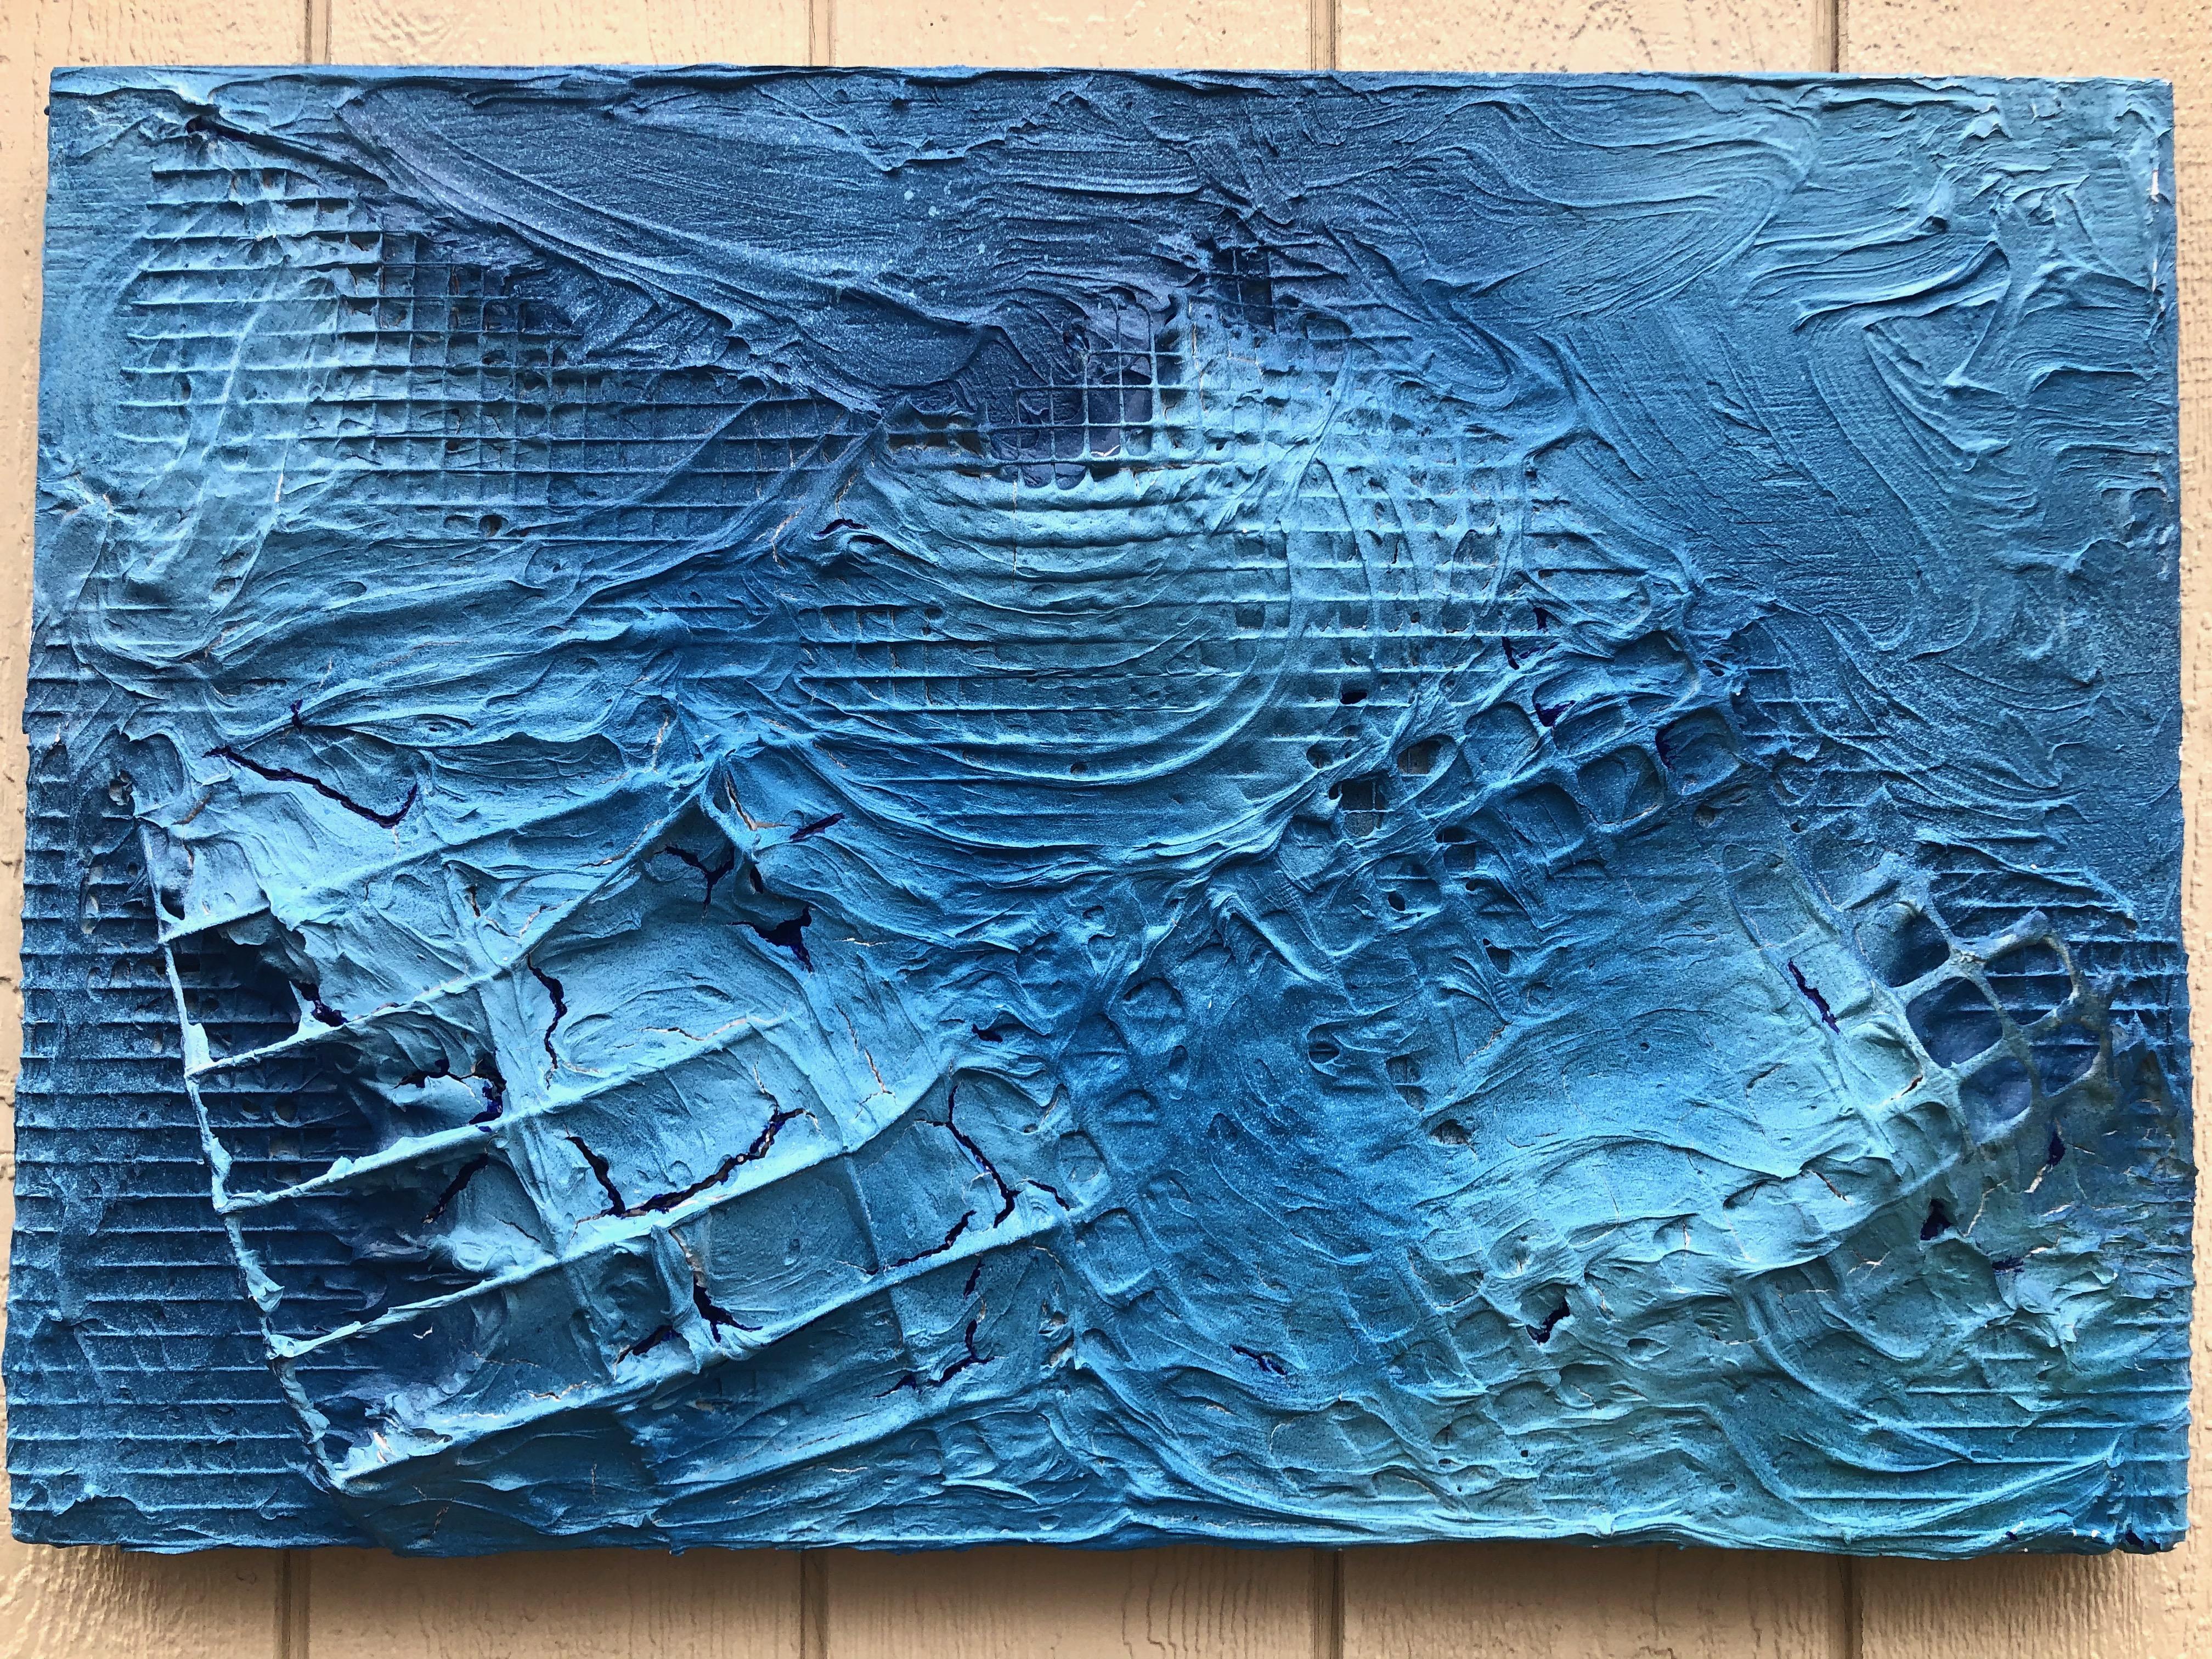 Abstract painting inspired by Blue ocean waves.  Textures of lifted metal, 3D, blue blends.  Original art ready to hang and signed on verso.

ARTIST BIO:

 A native of Queens, New York, Joel Blenz is a painter working in conversation with textured